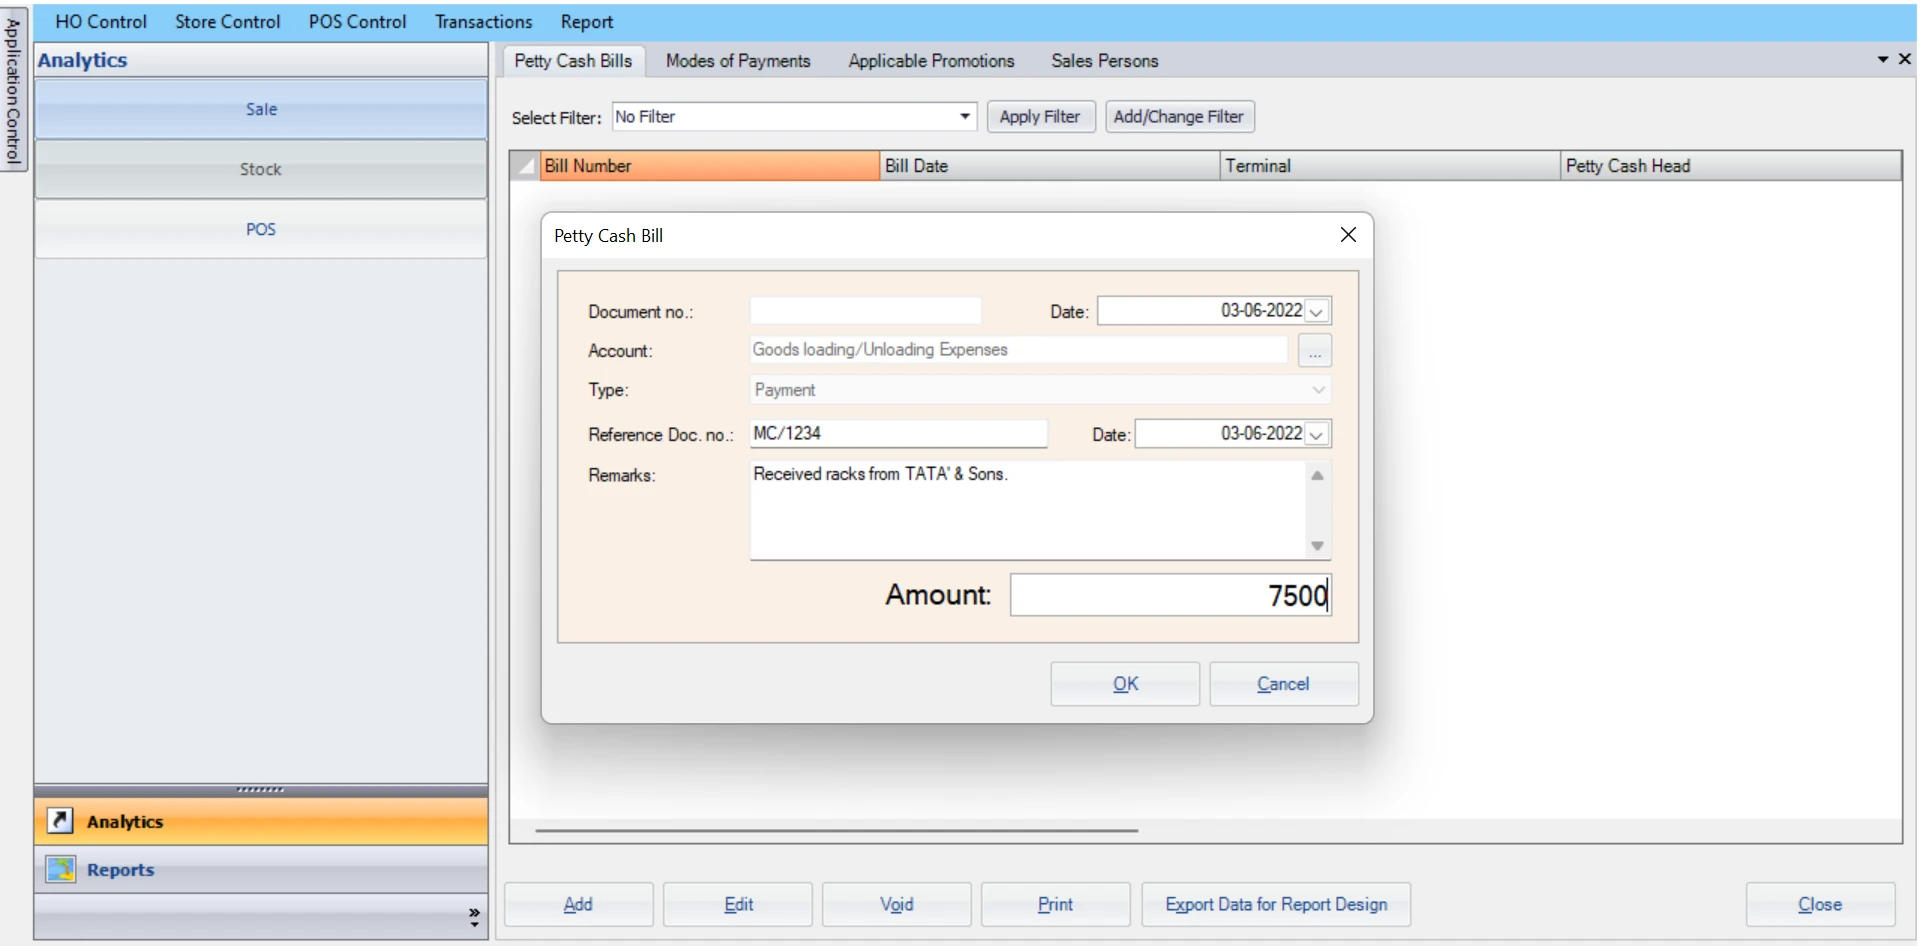 Petty Cash Management with Ginesys Desktop POS